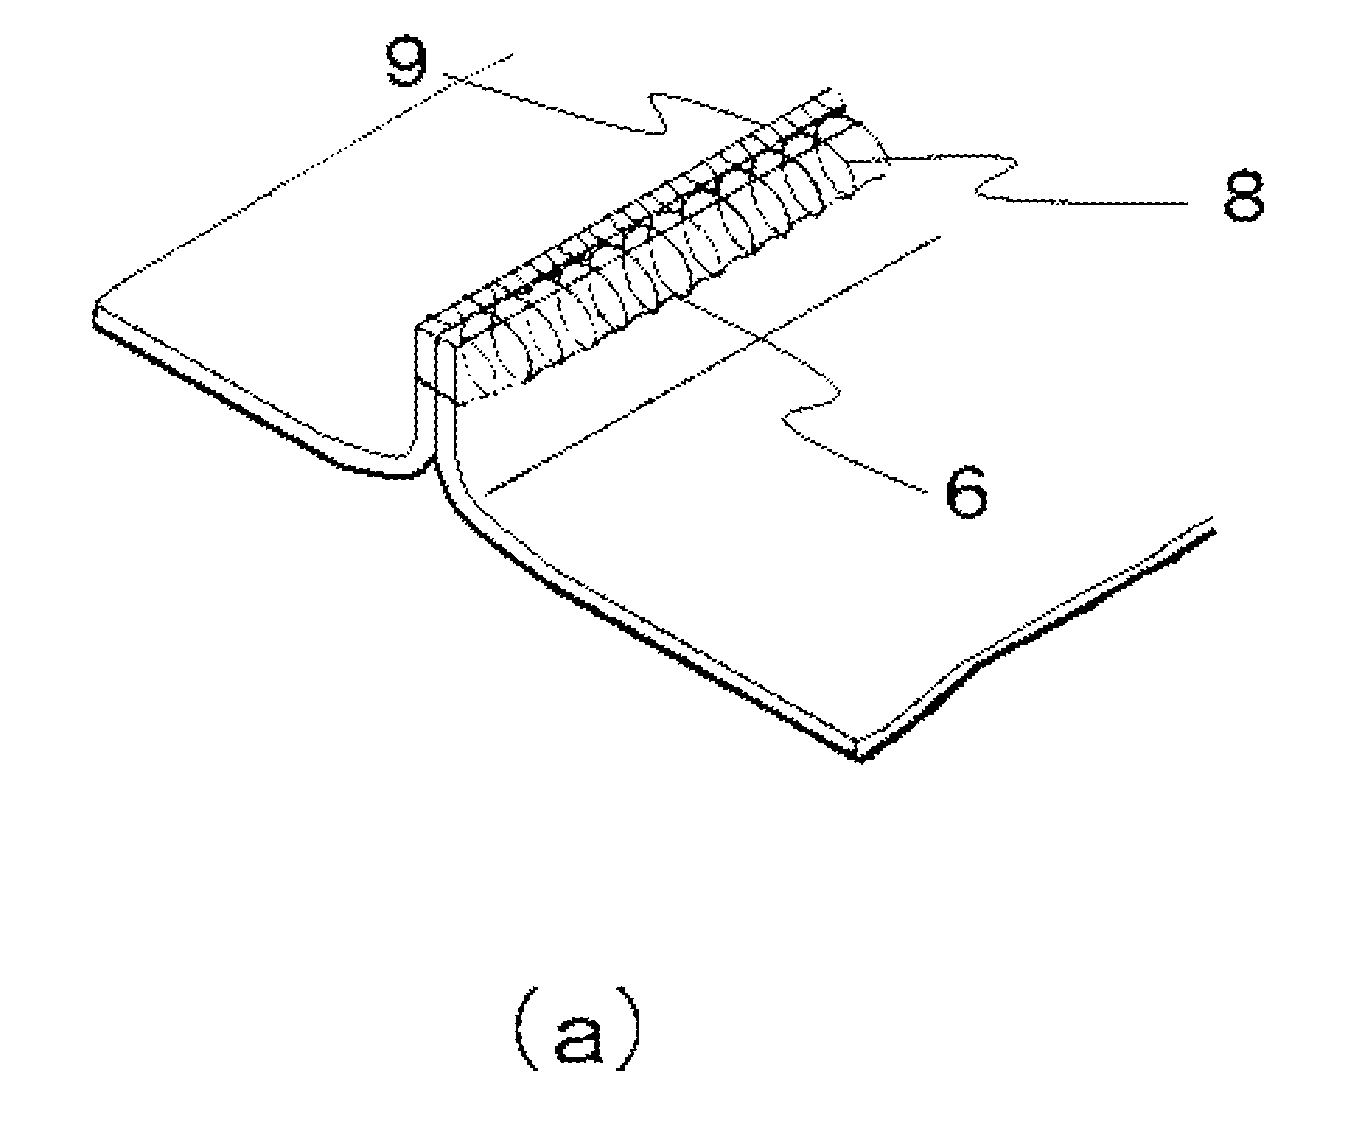 Seam structure for fabric